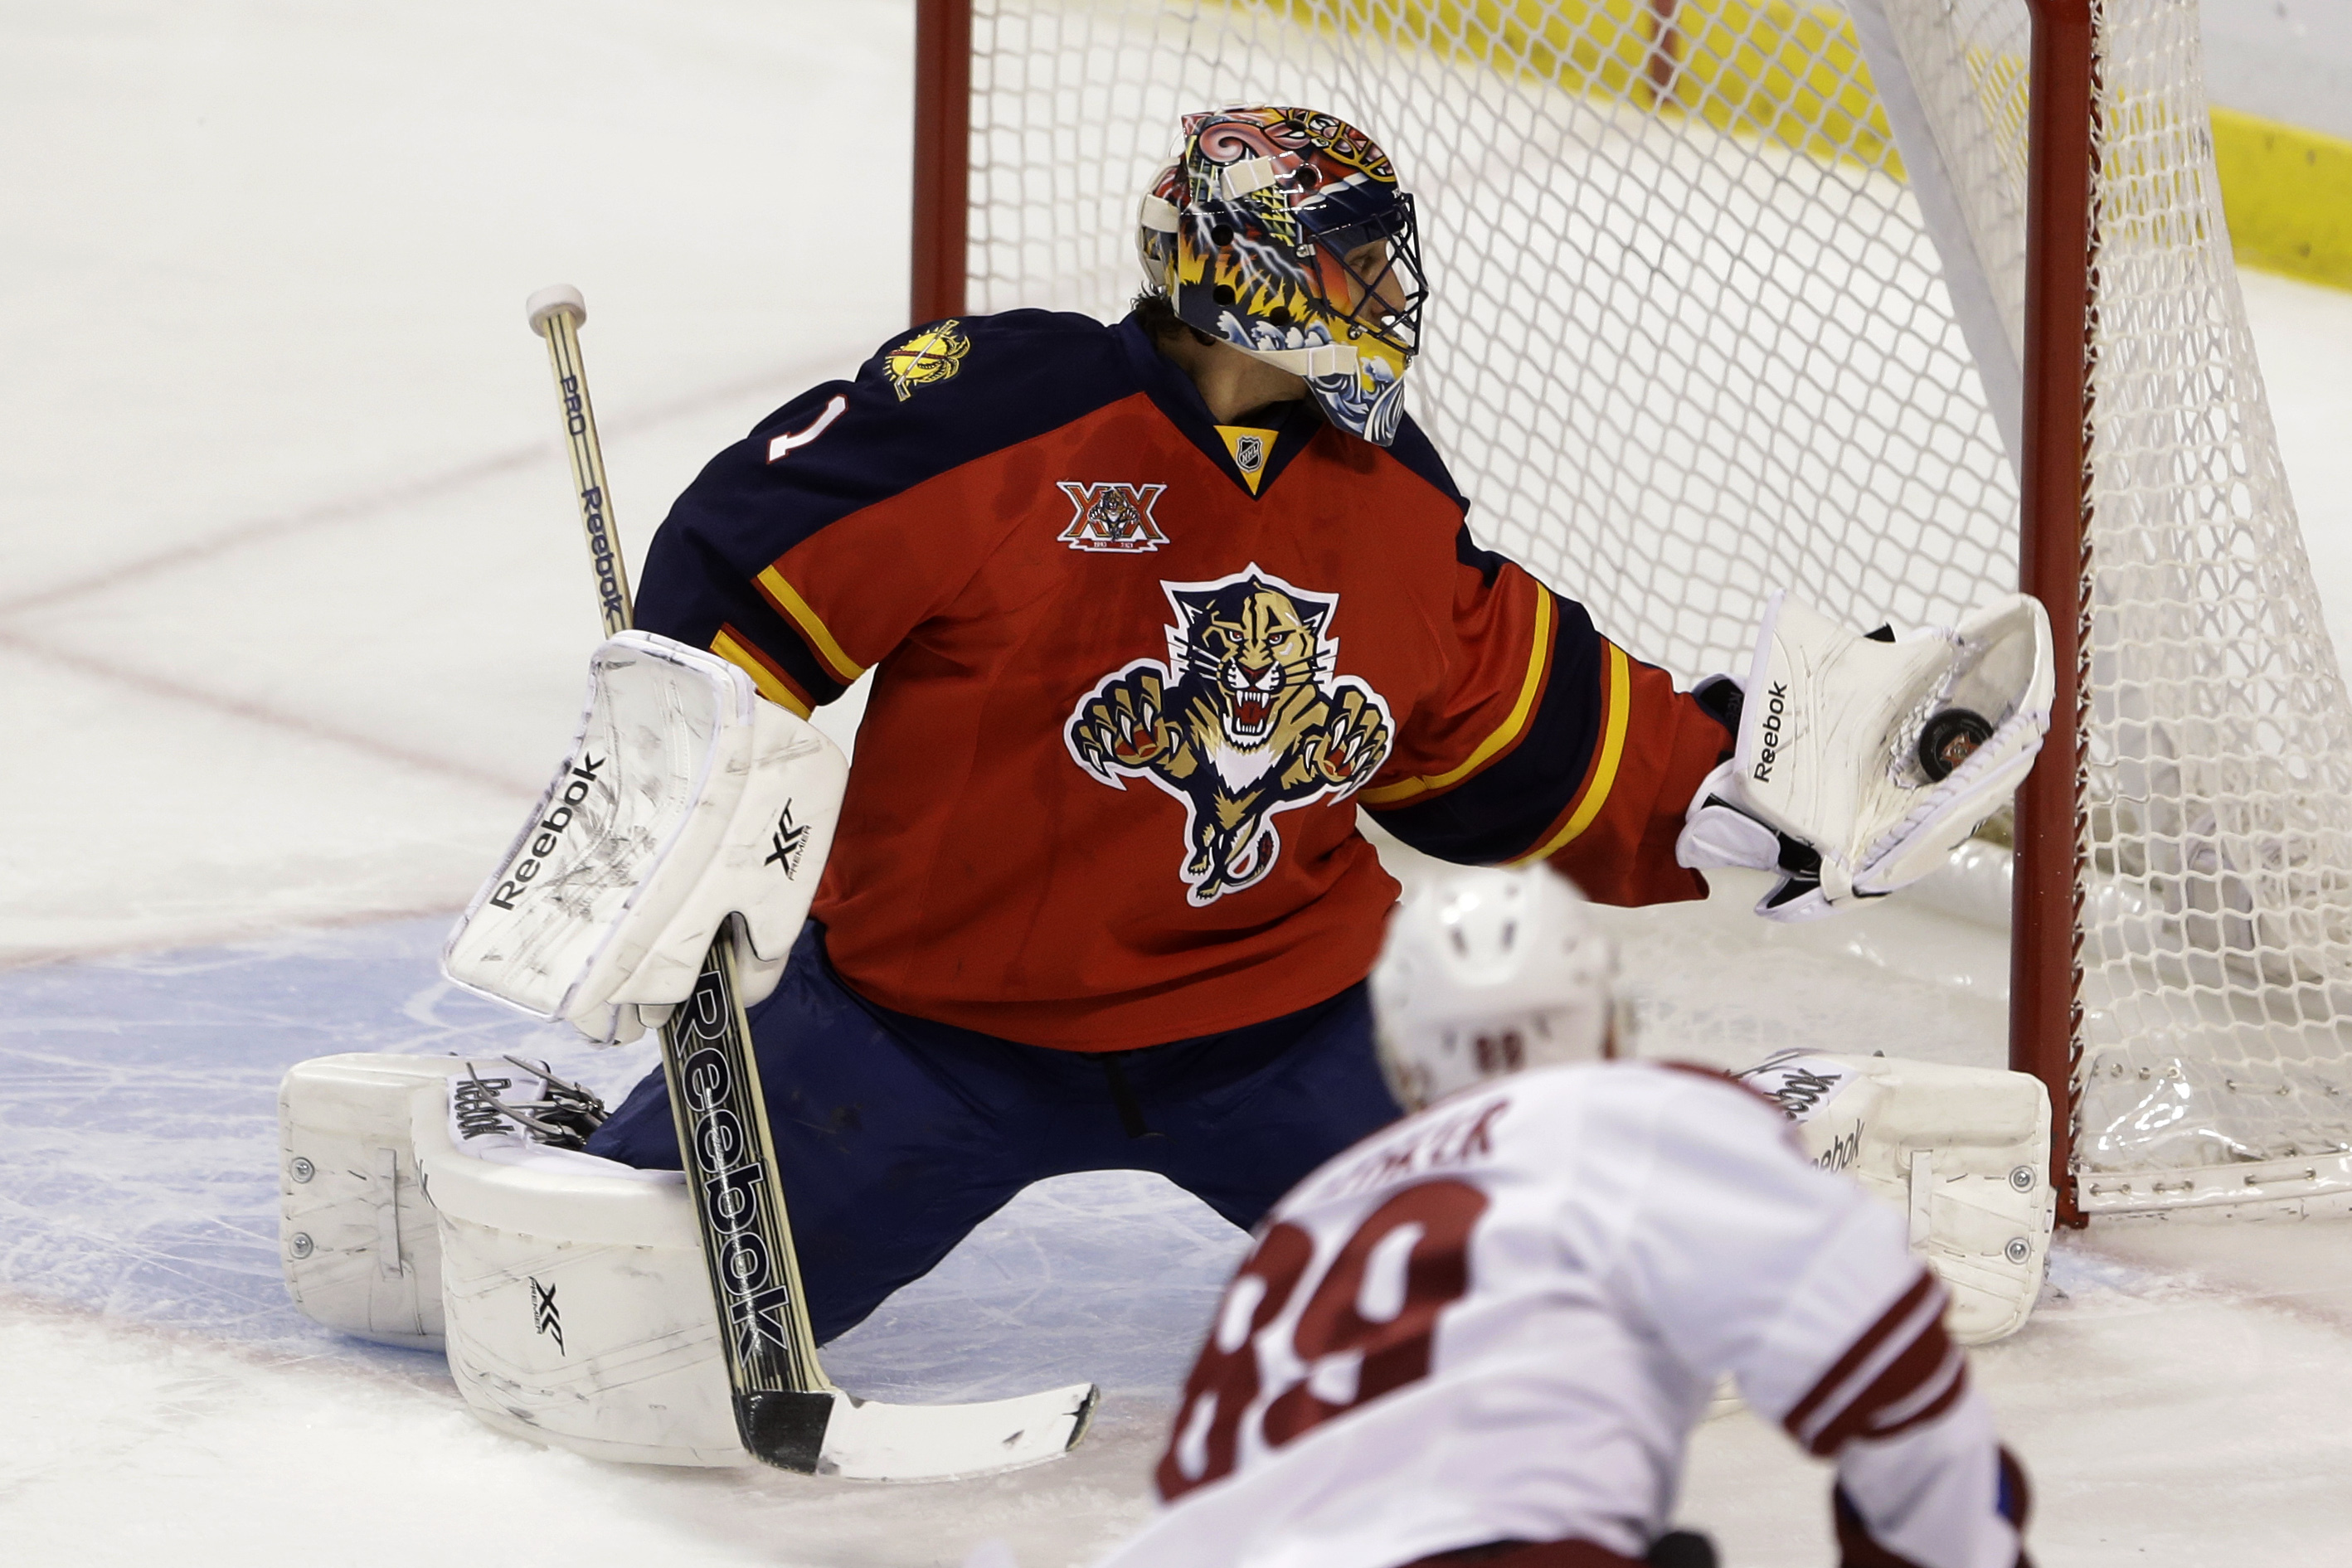 Panthers goalie Roberto Luongo leaves game with injury